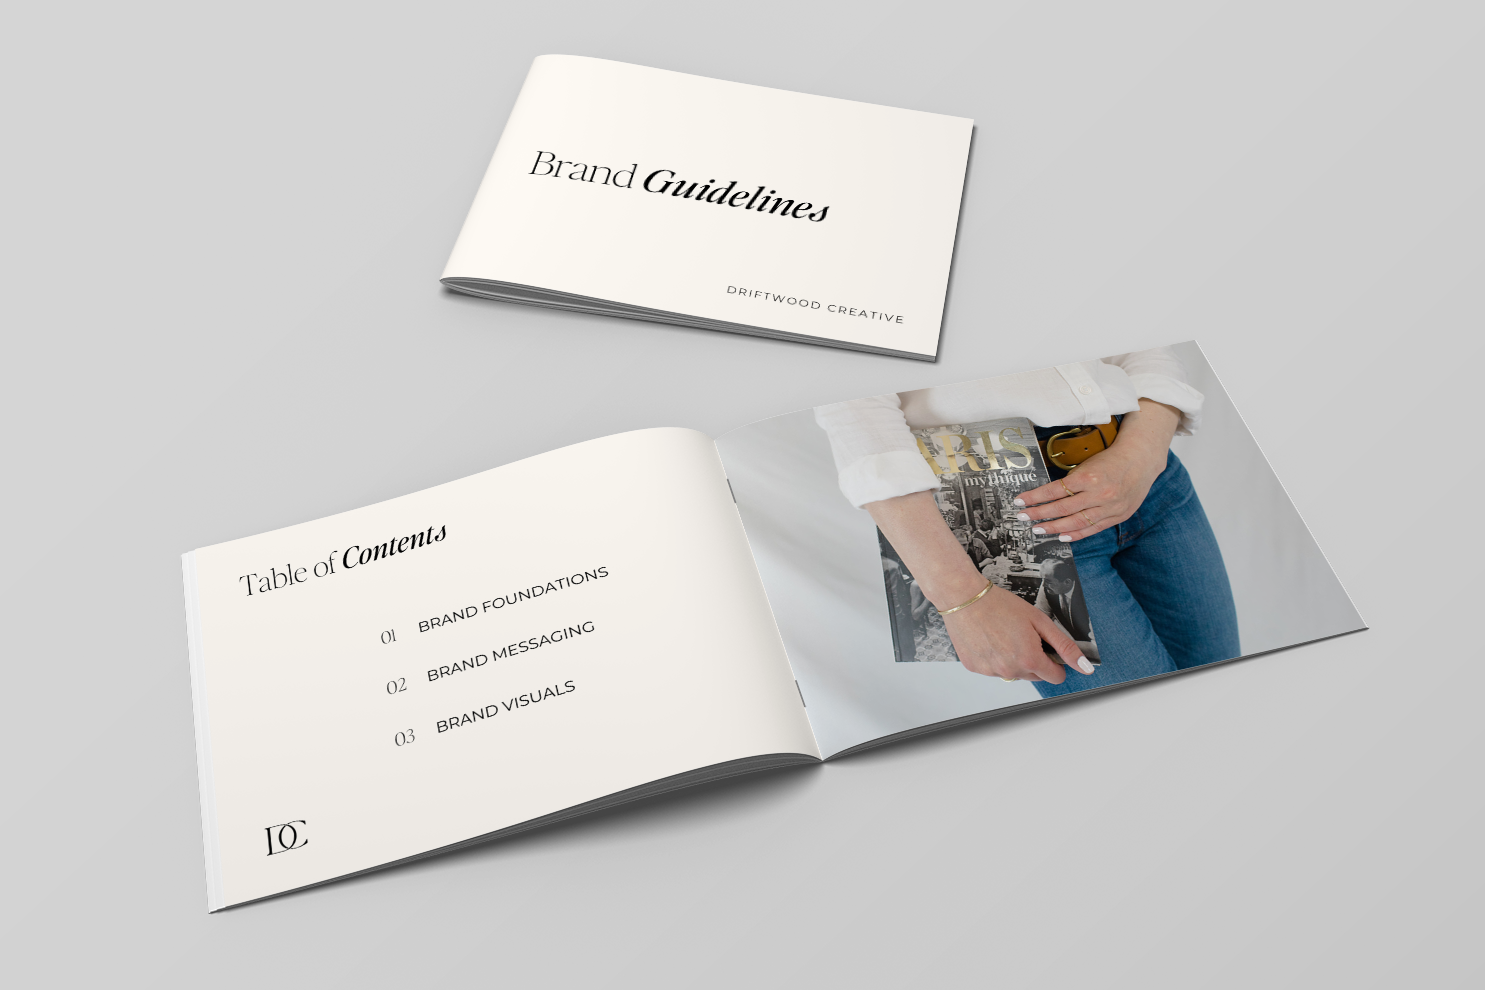 Mockup of brand guidelines showing table of contents and what to include in brand guidelines.